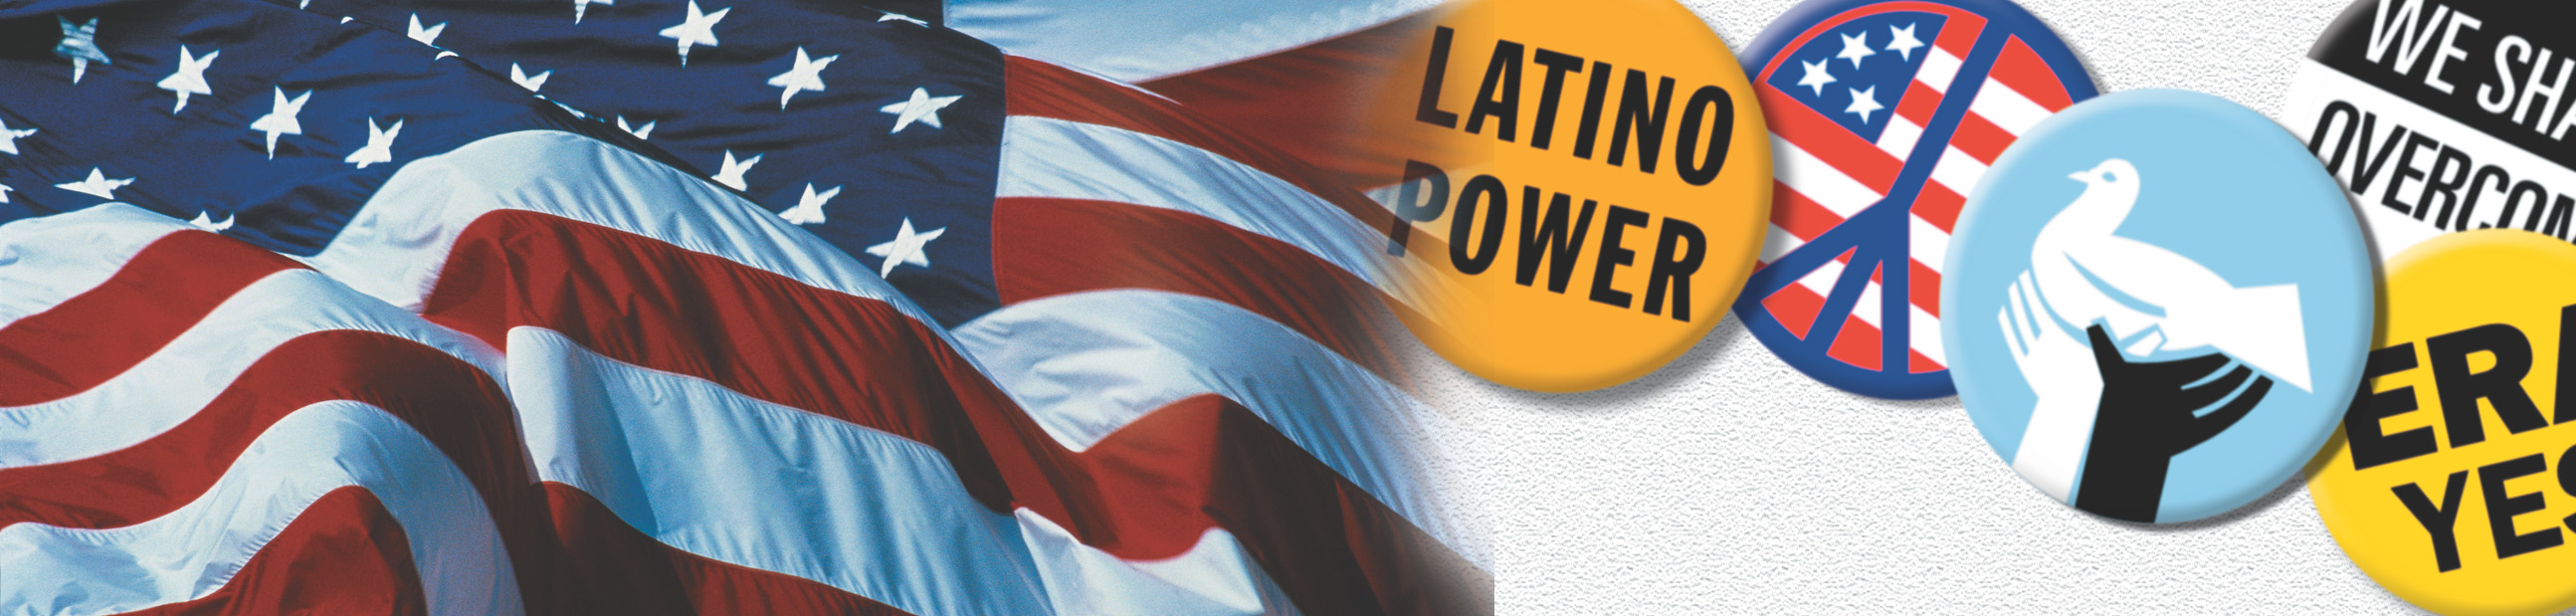 Banner: an American flag billows near political buttons with slogans like Latino Power, ERA Yes, and We Shall Overcome.